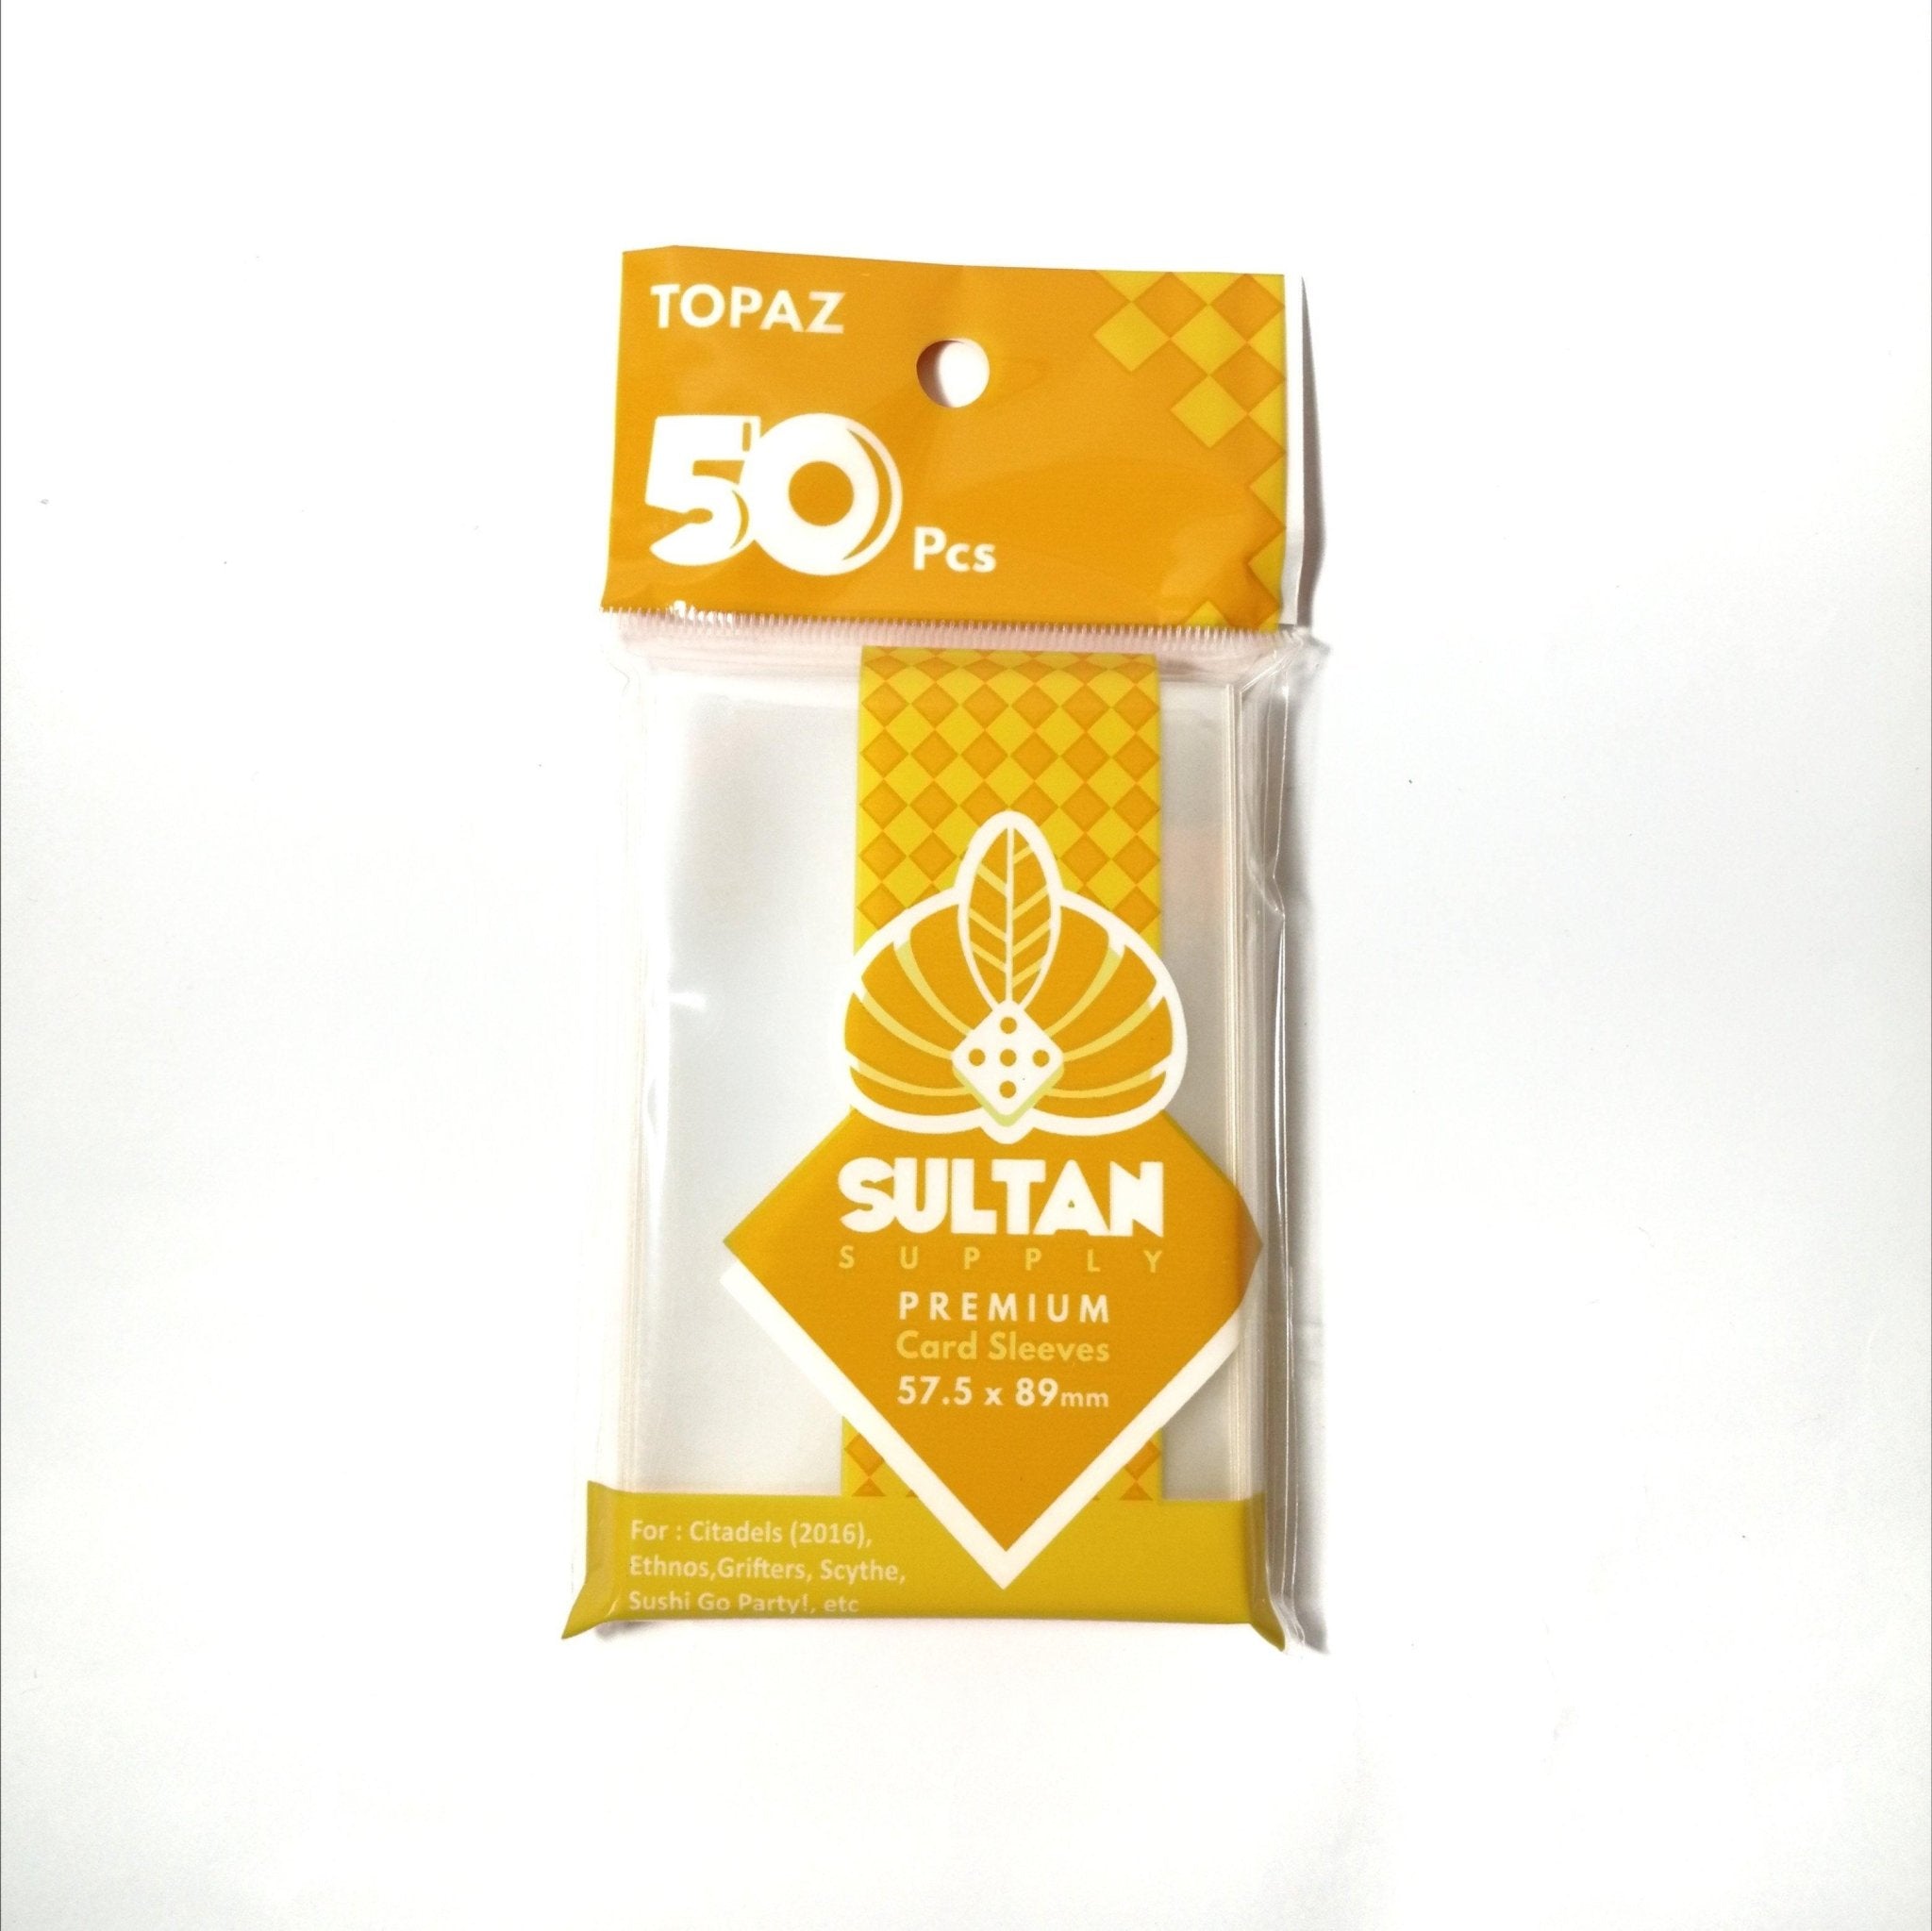 Sultan Supply Premium Card Sleeves: 57.5 x 89 mm Topaz (90 microns) - Gaming Library